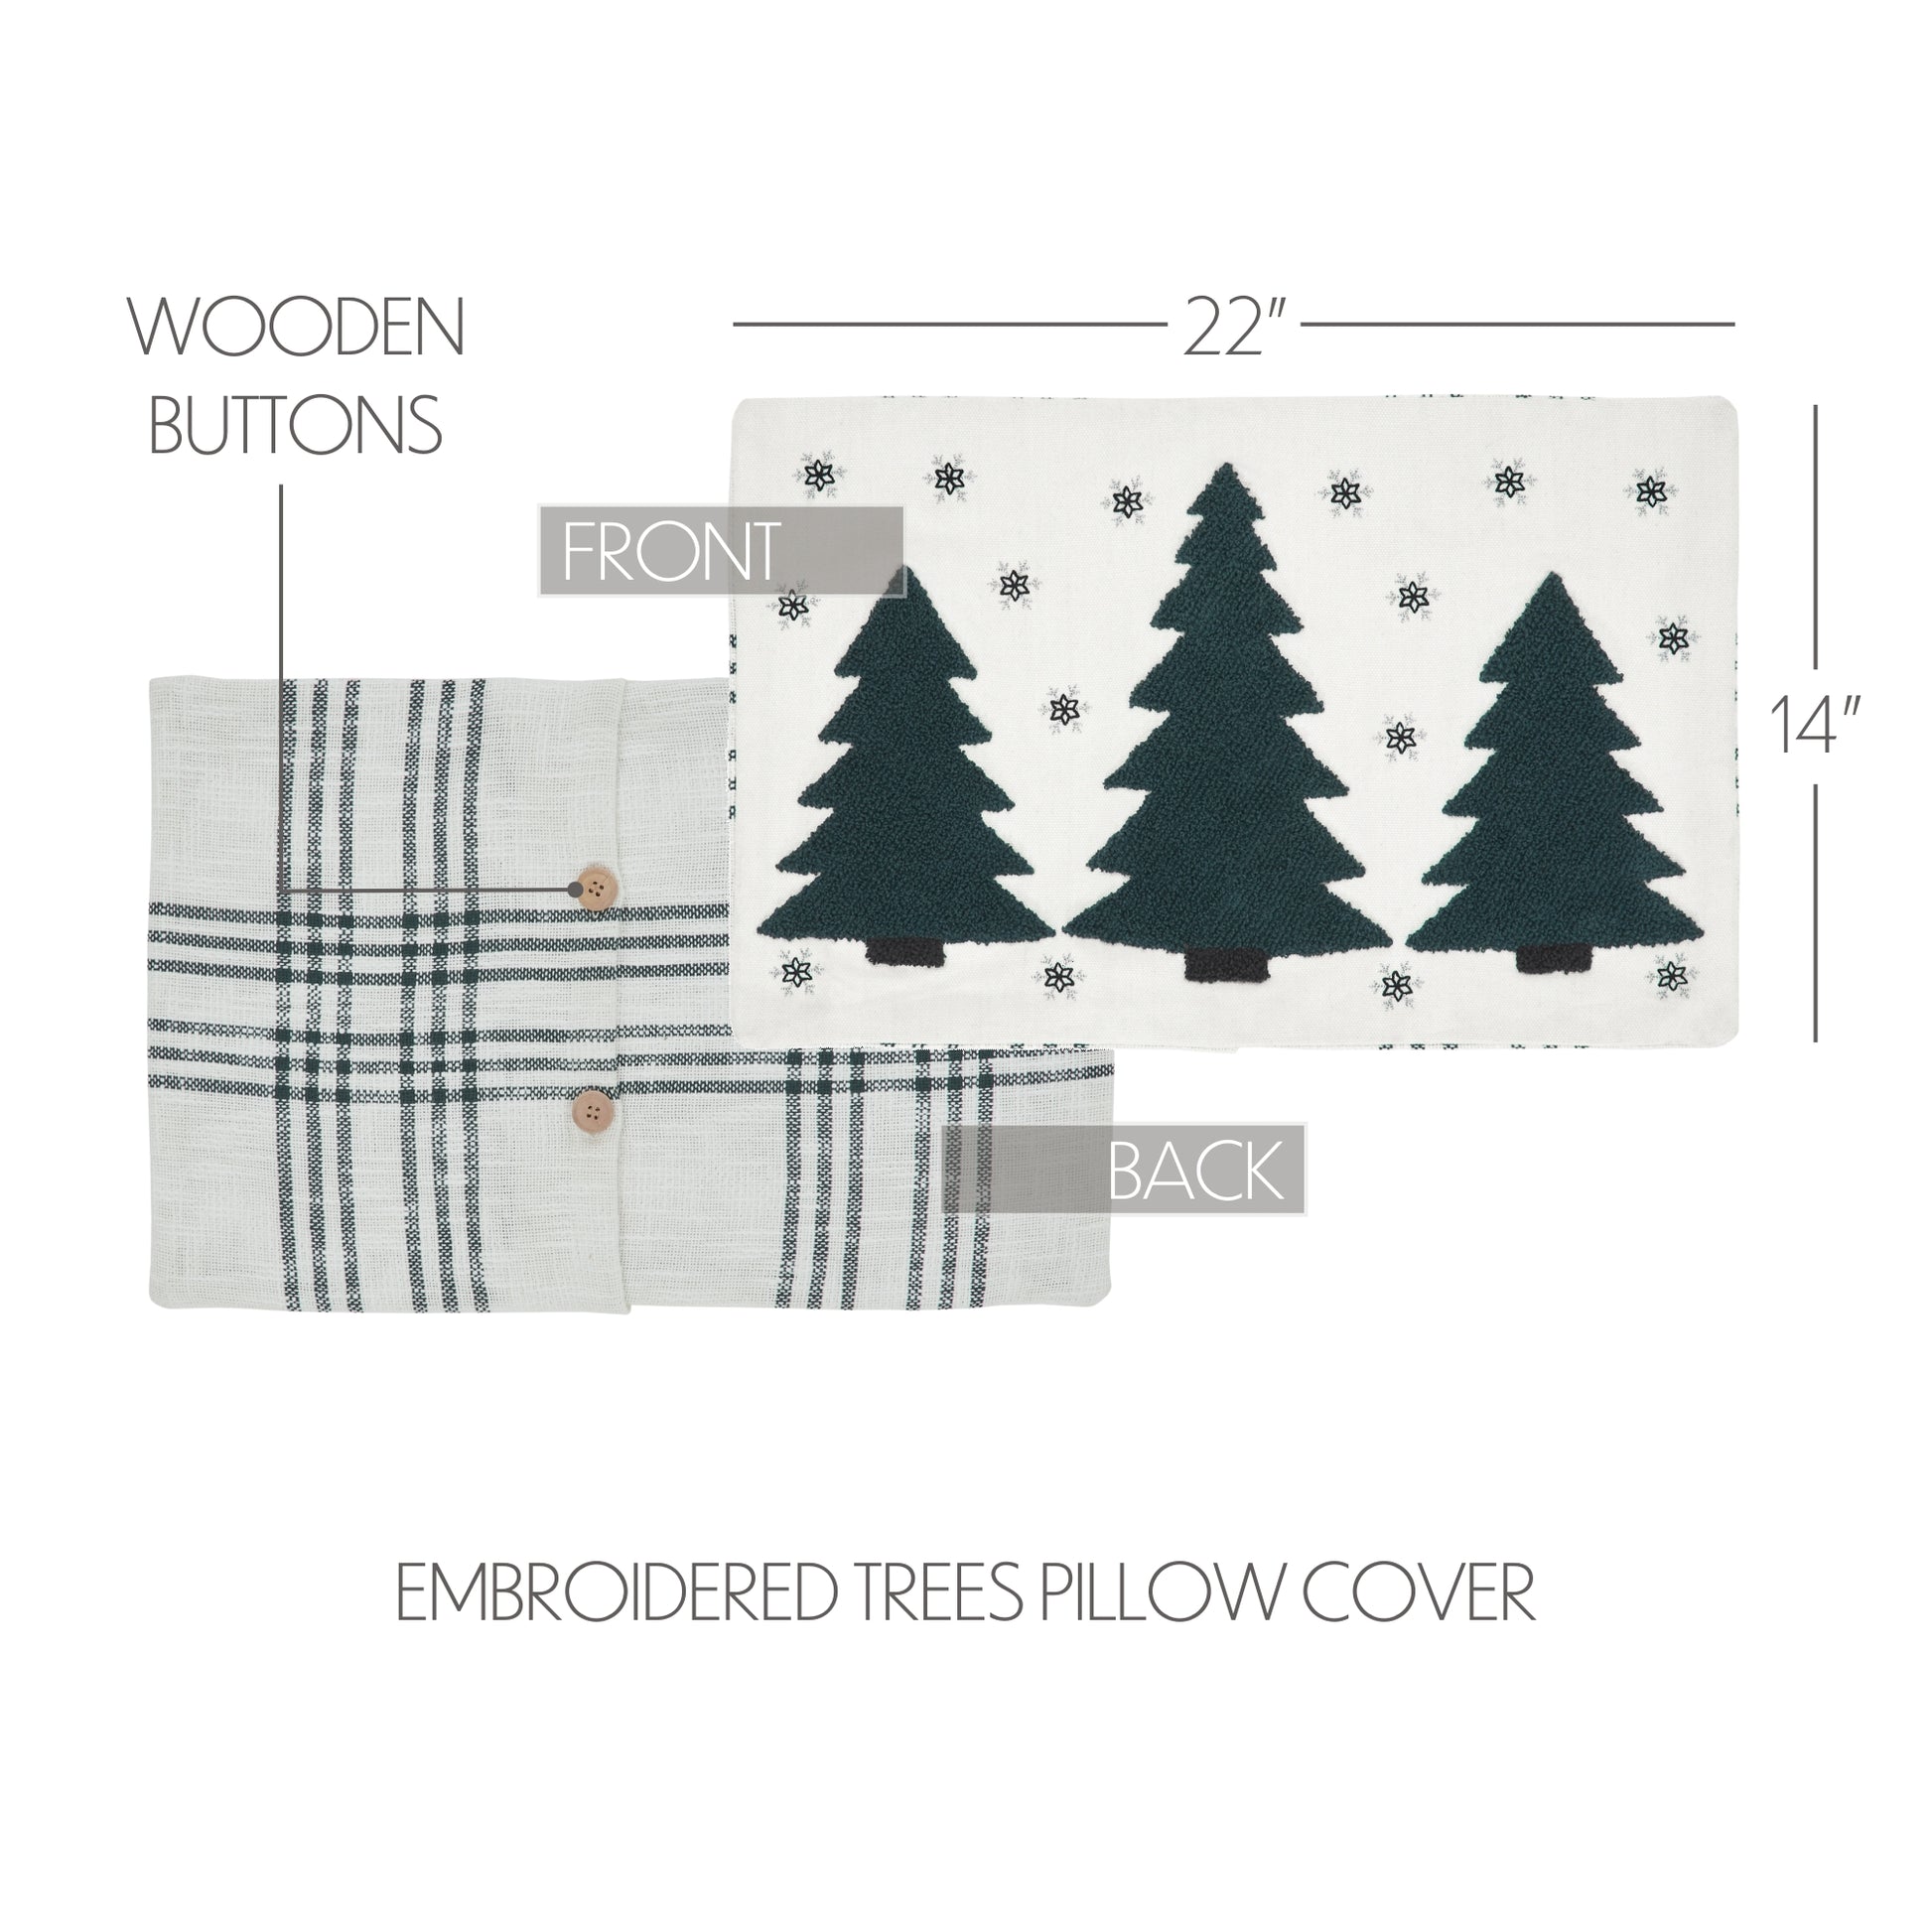 80425-Pine-Grove-Plaid-Embroidered-Trees-Pillow-Cover-14x22-image-1